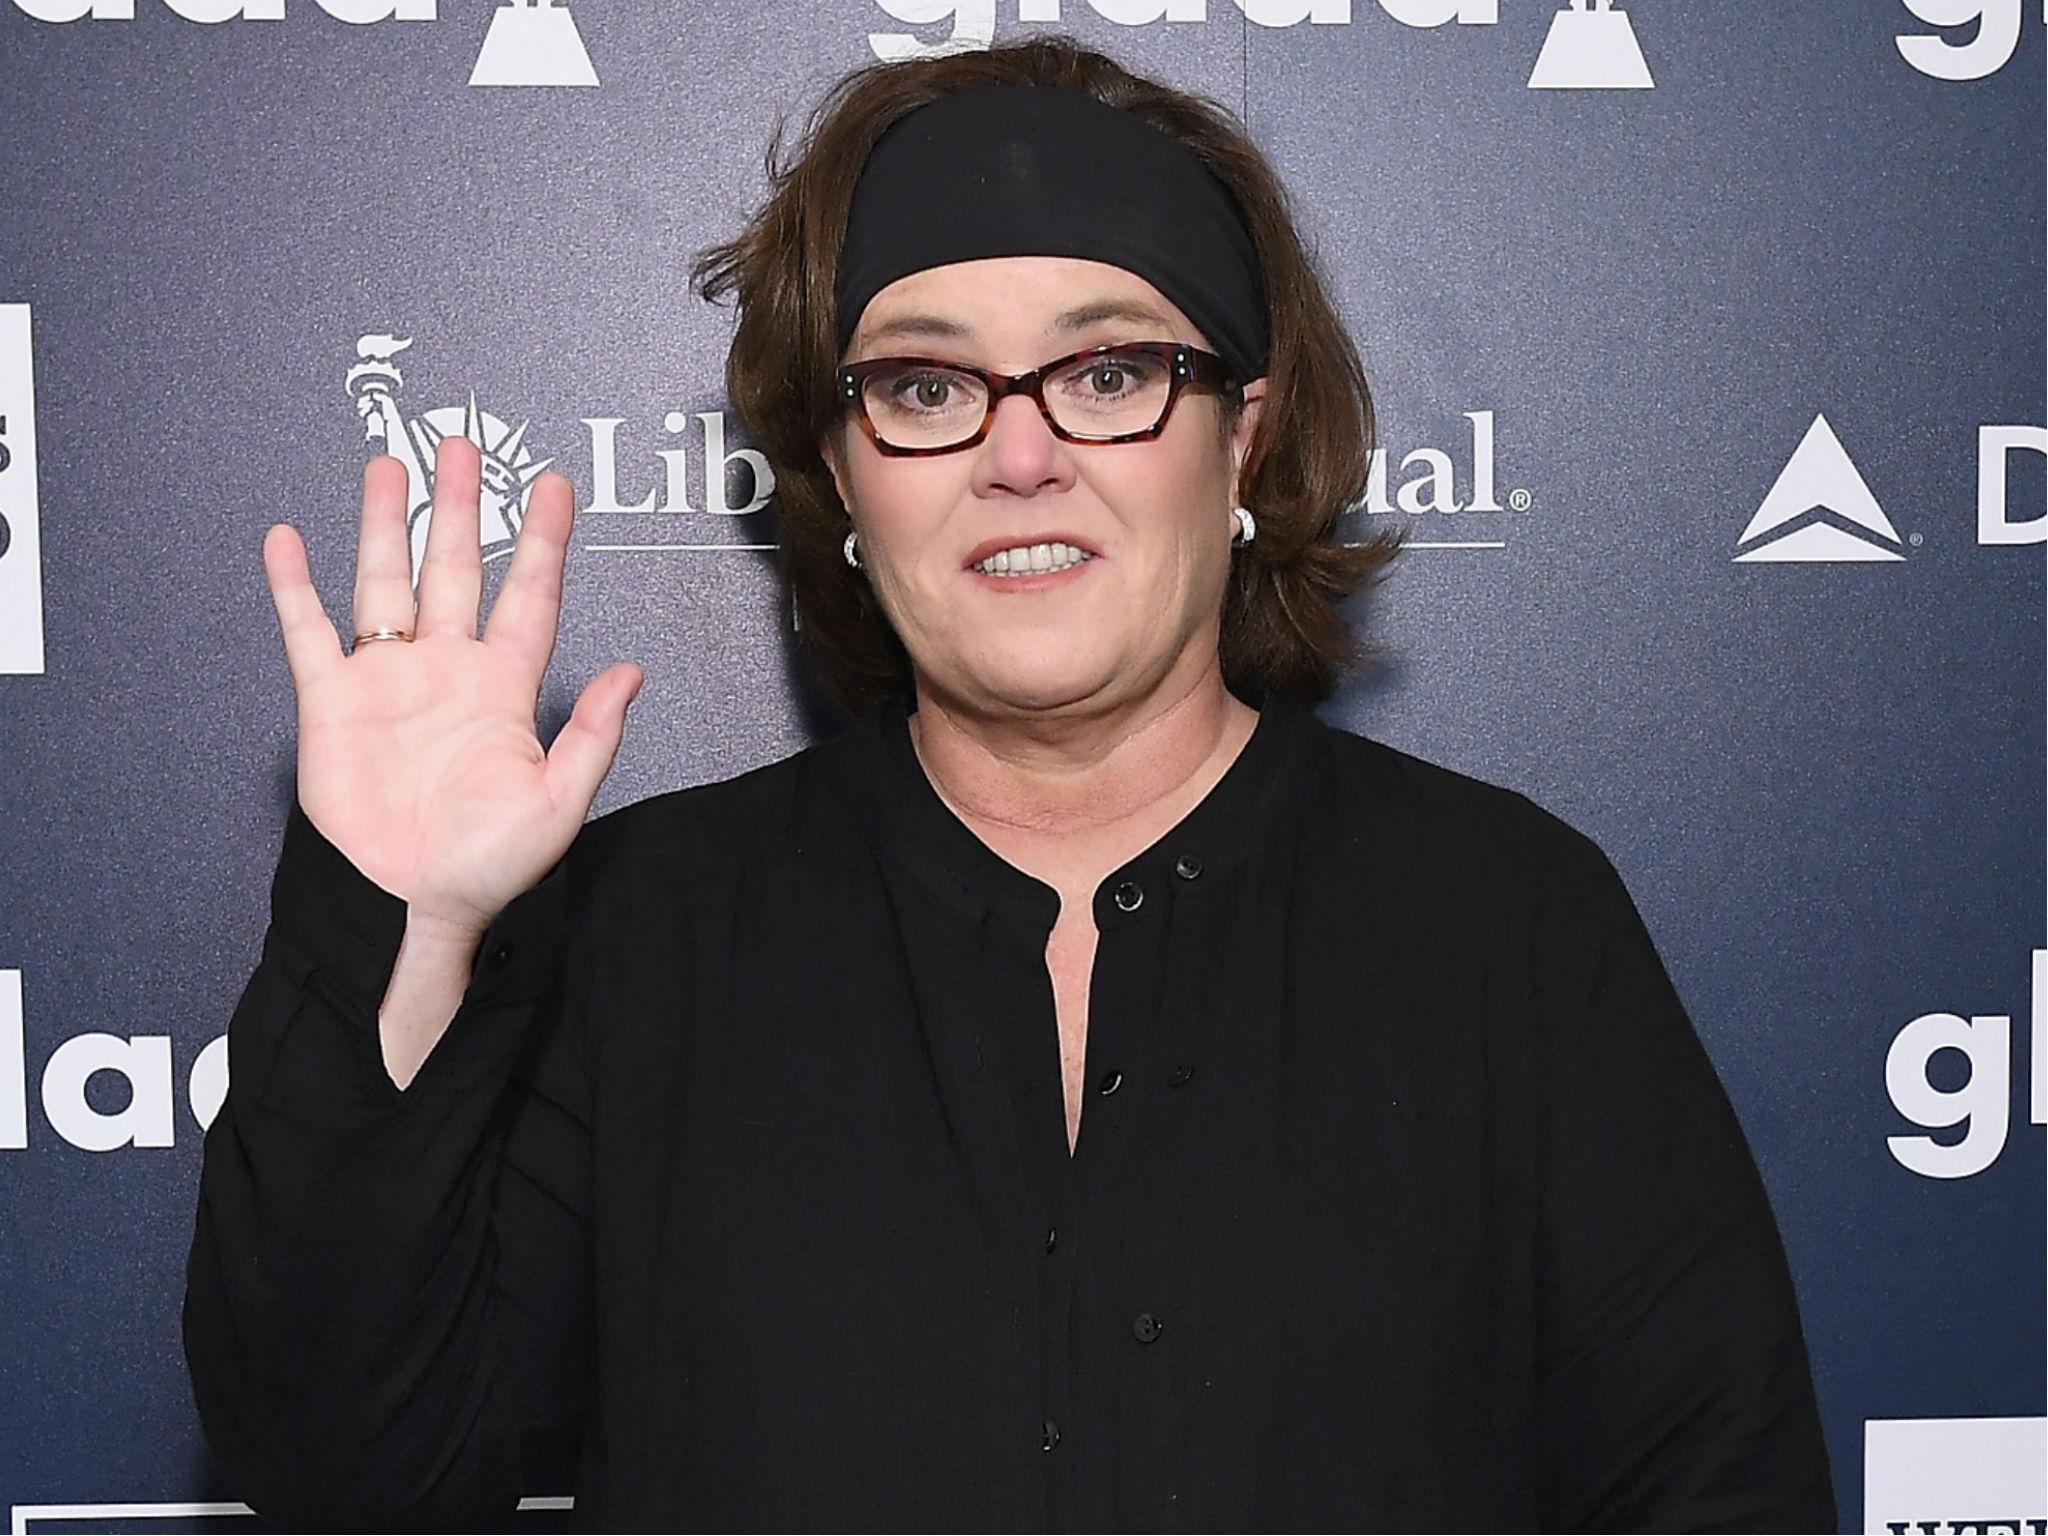 Rosie O'Donnell attends 28th Annual GLAAD Media Awards at The Hilton Midtown on May 6, 2017 in New York City.